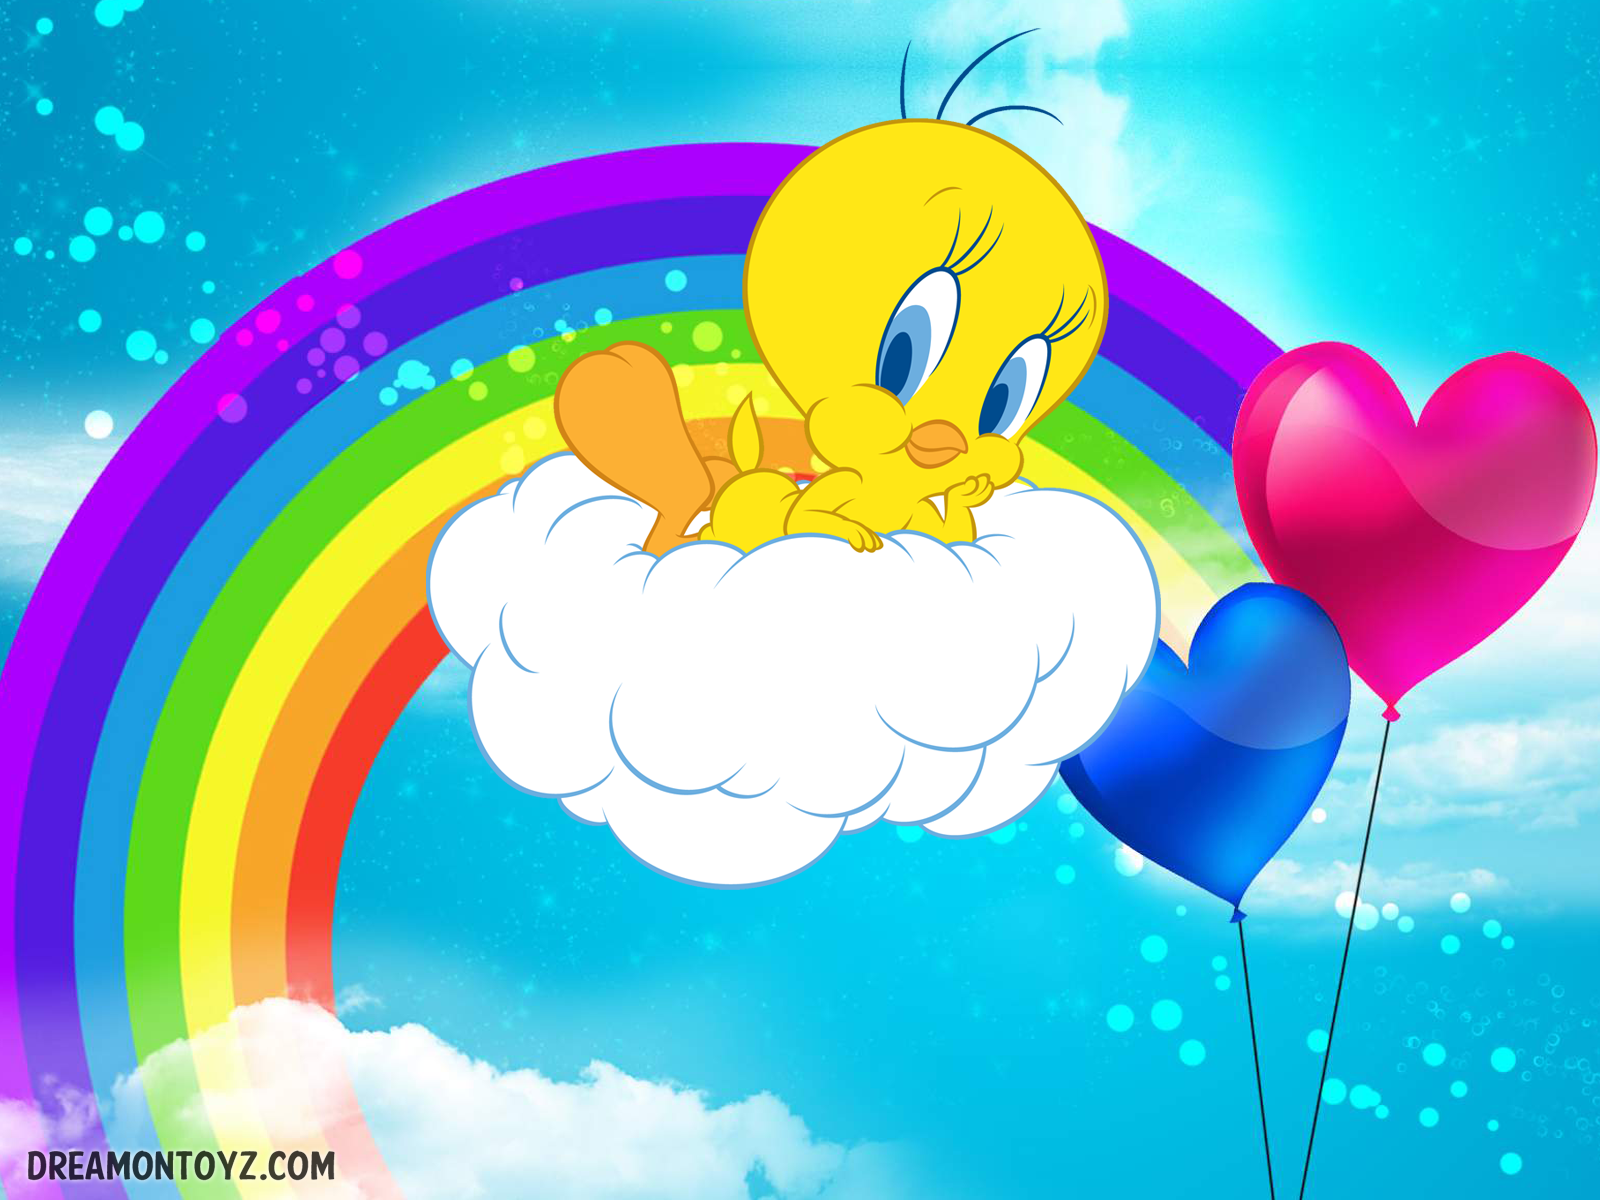 Tweety Bird on a cloud with a rainbow and heart balloons